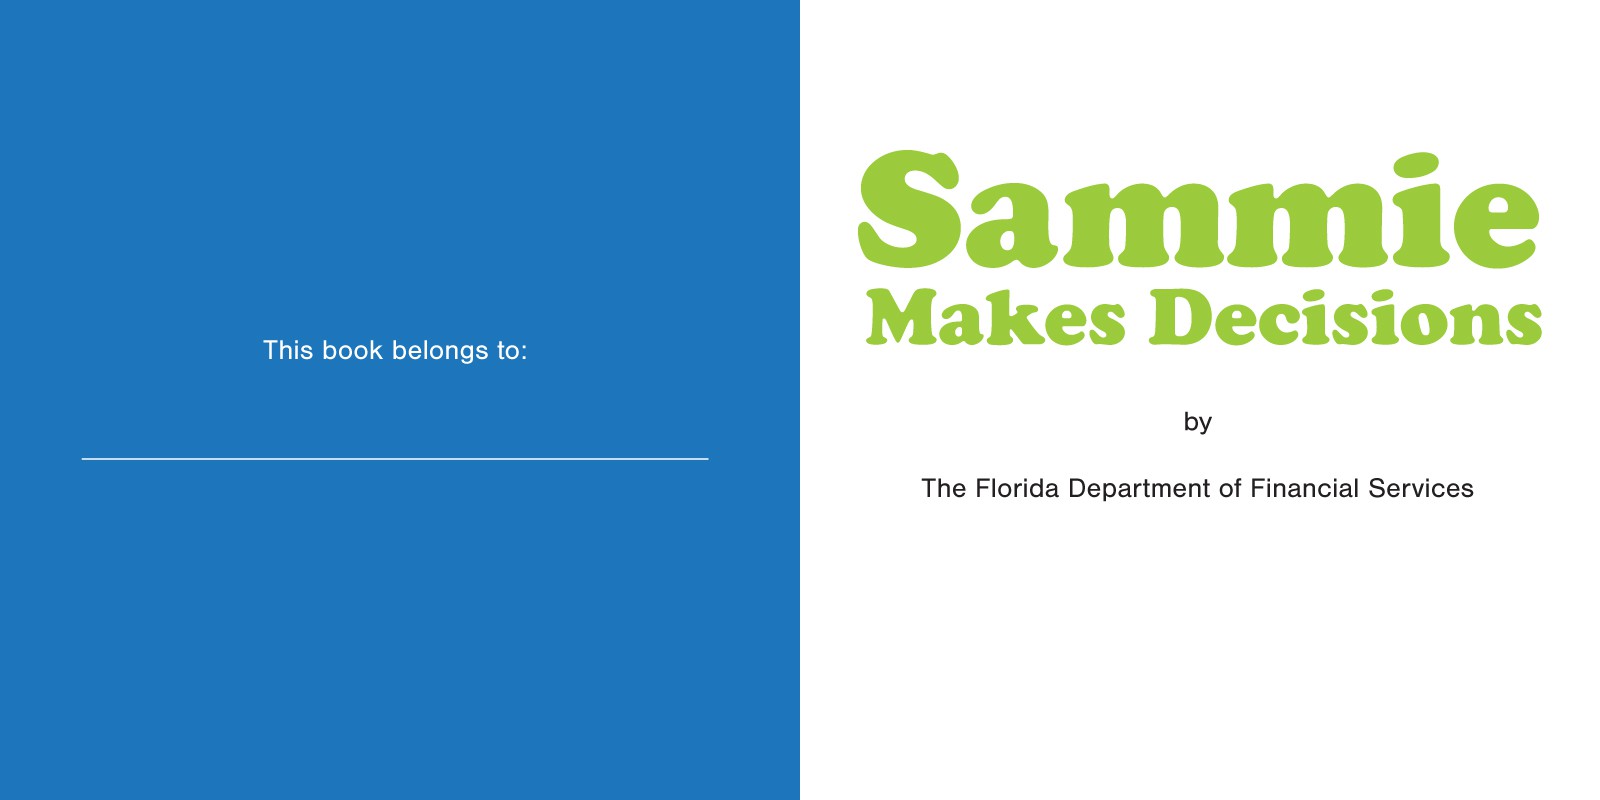 Slide 2 of the Sammie Makes Decisions Book